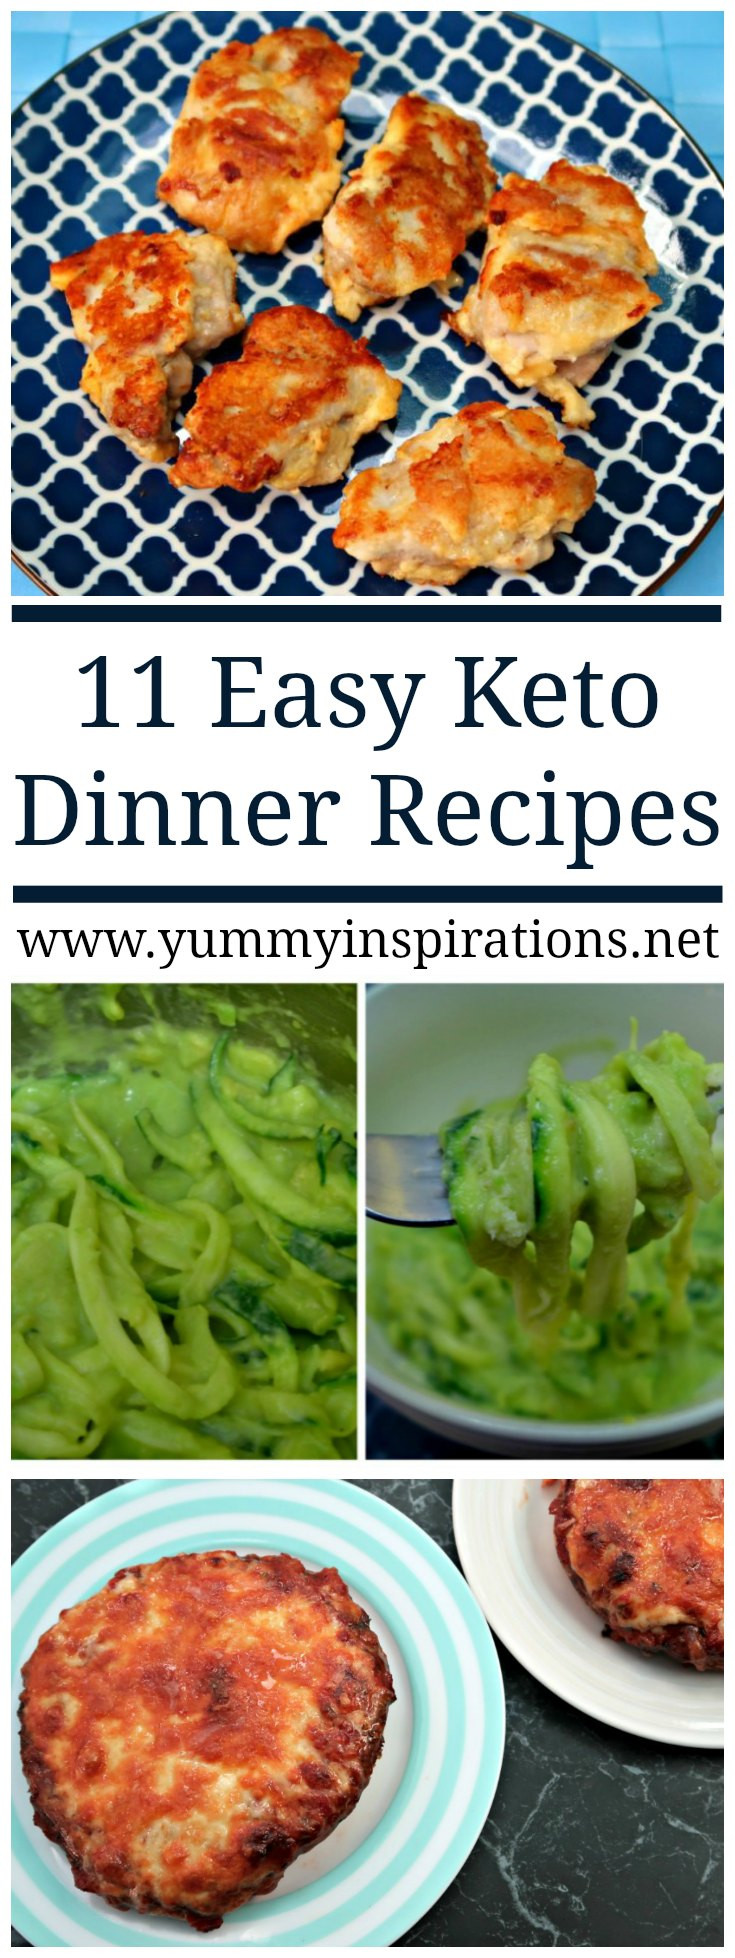 Chicken Keto Recipes Easy Dinners
 11 Easy Keto Dinner Recipes Quick Low Carb Ketogenic